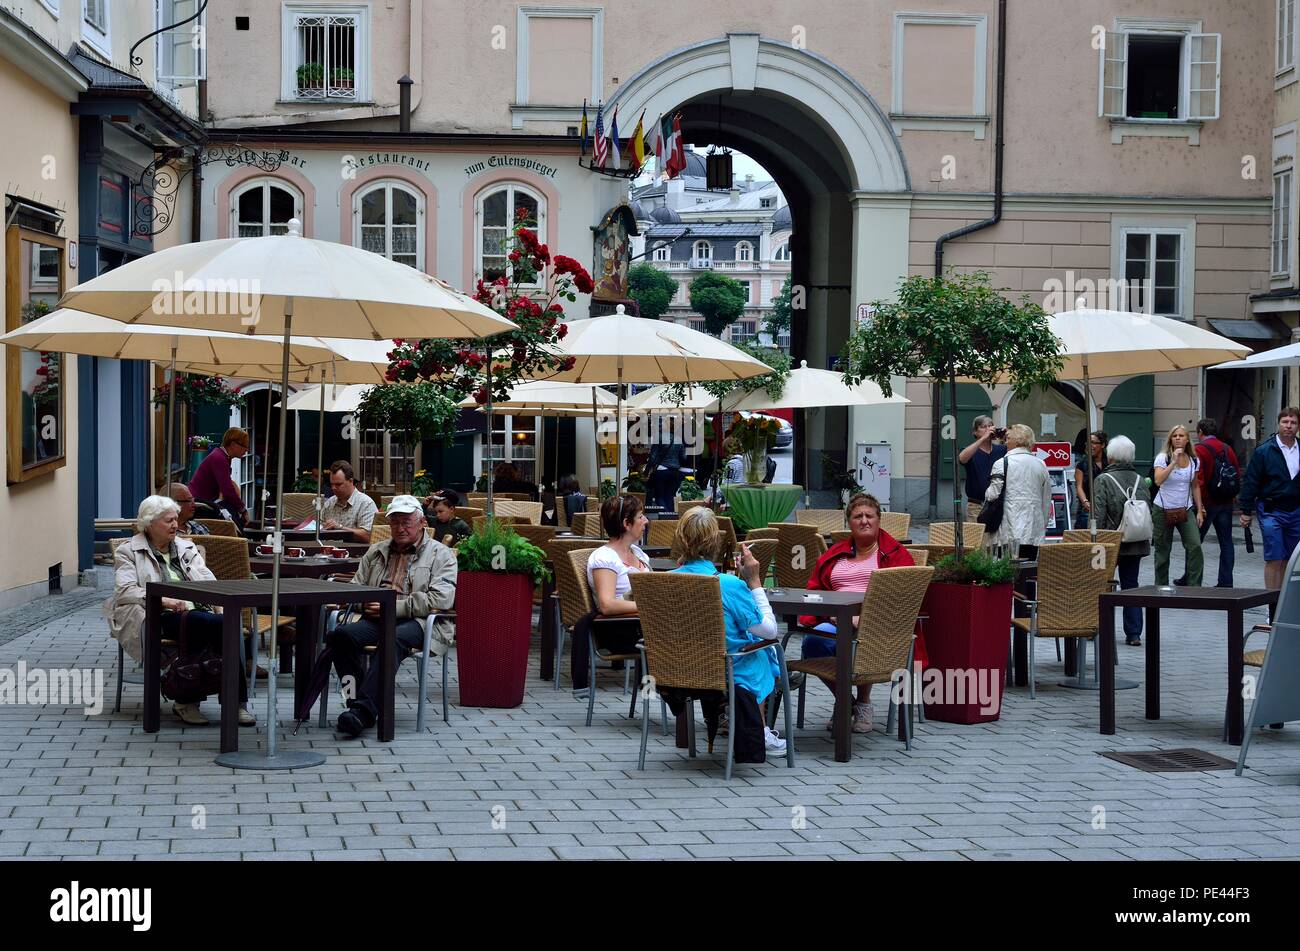 A view of a Cafe on a lazy afternoon in the famous Getreidegasse, next to Mozart's birthplace in the Altstadt (Old Town) of Salzburg, Austria Stock Photo